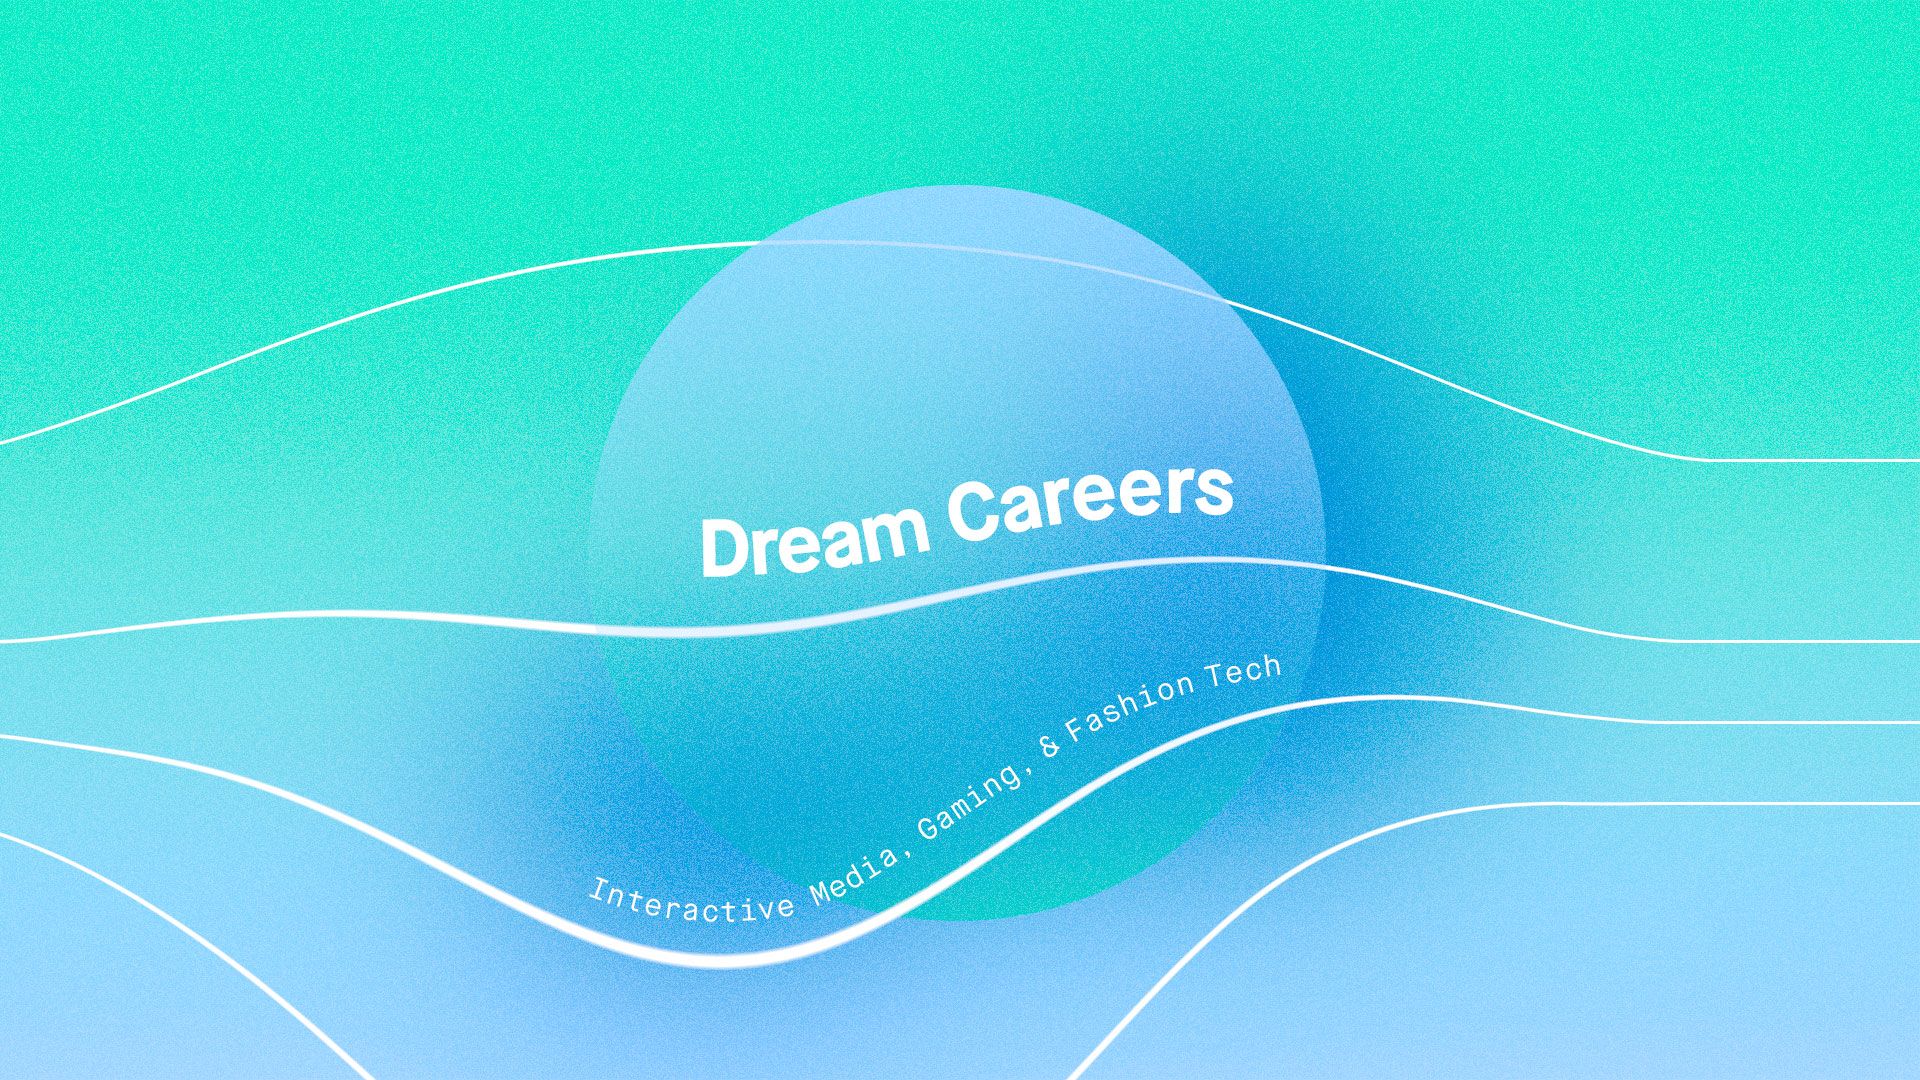 Dream Careers: Four Decades in Interactive Media, Gaming, & Fashion Tech